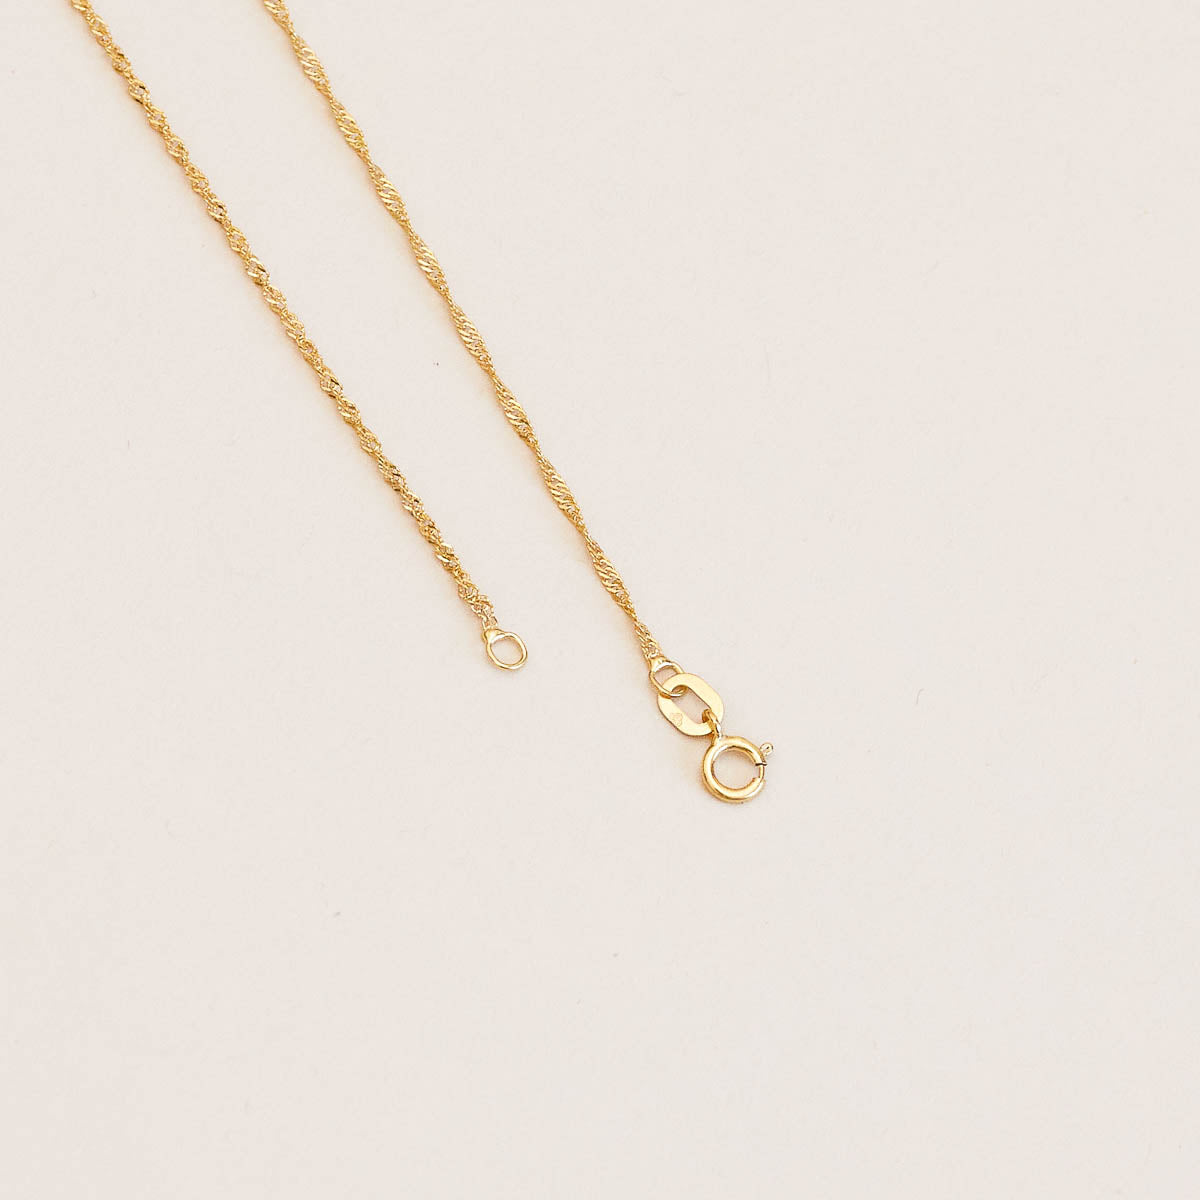 Astrid 9k Gold Chain Necklace | Astrid & Miyu Necklaces